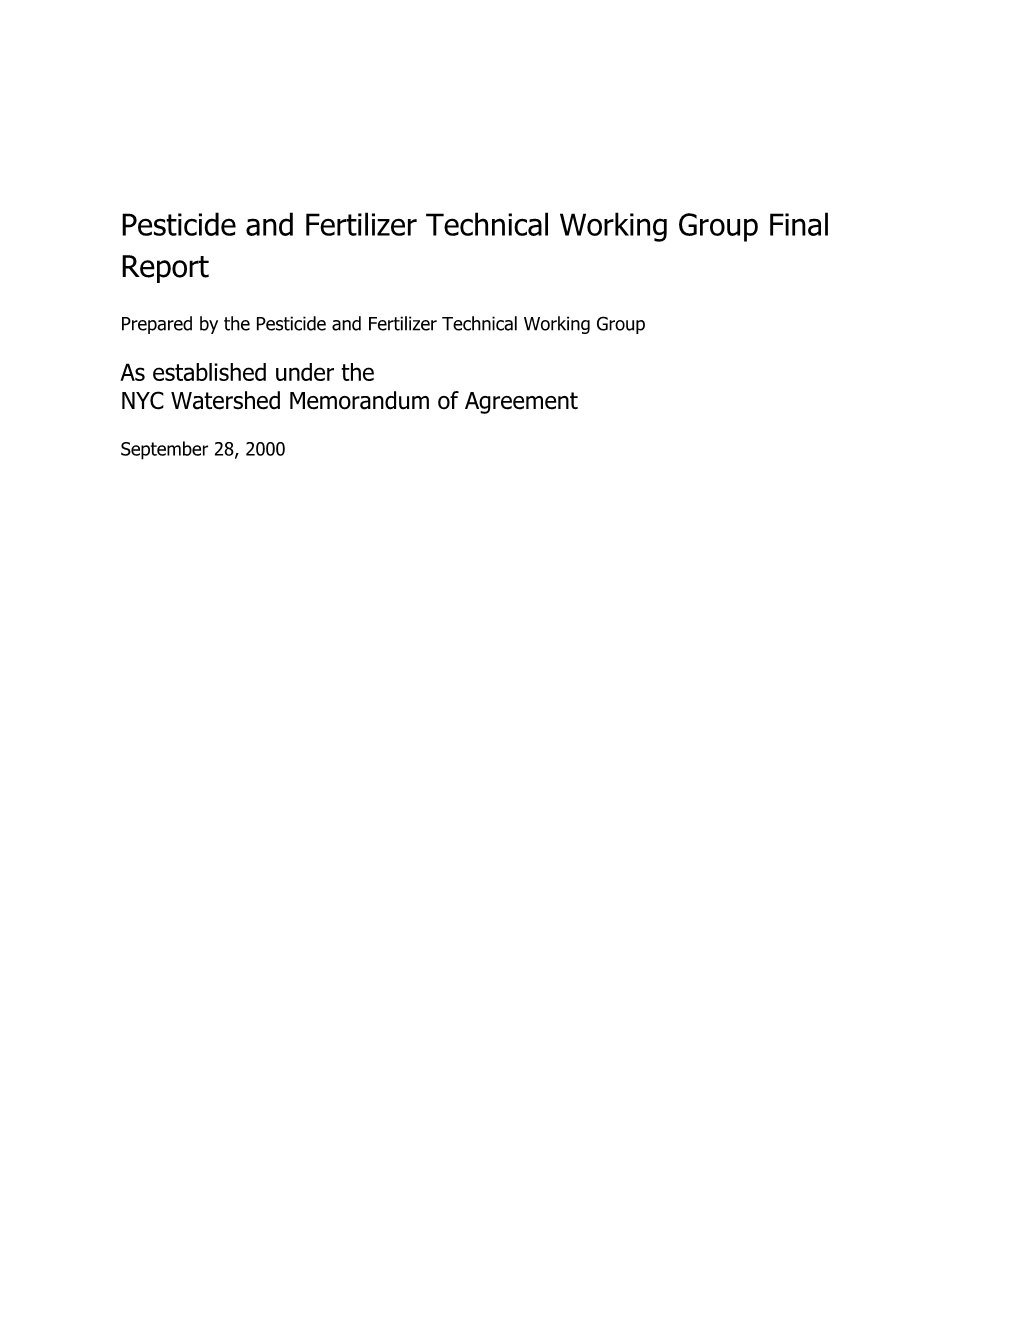 Pesticide and Fertilizer Technical Working Group Final Report